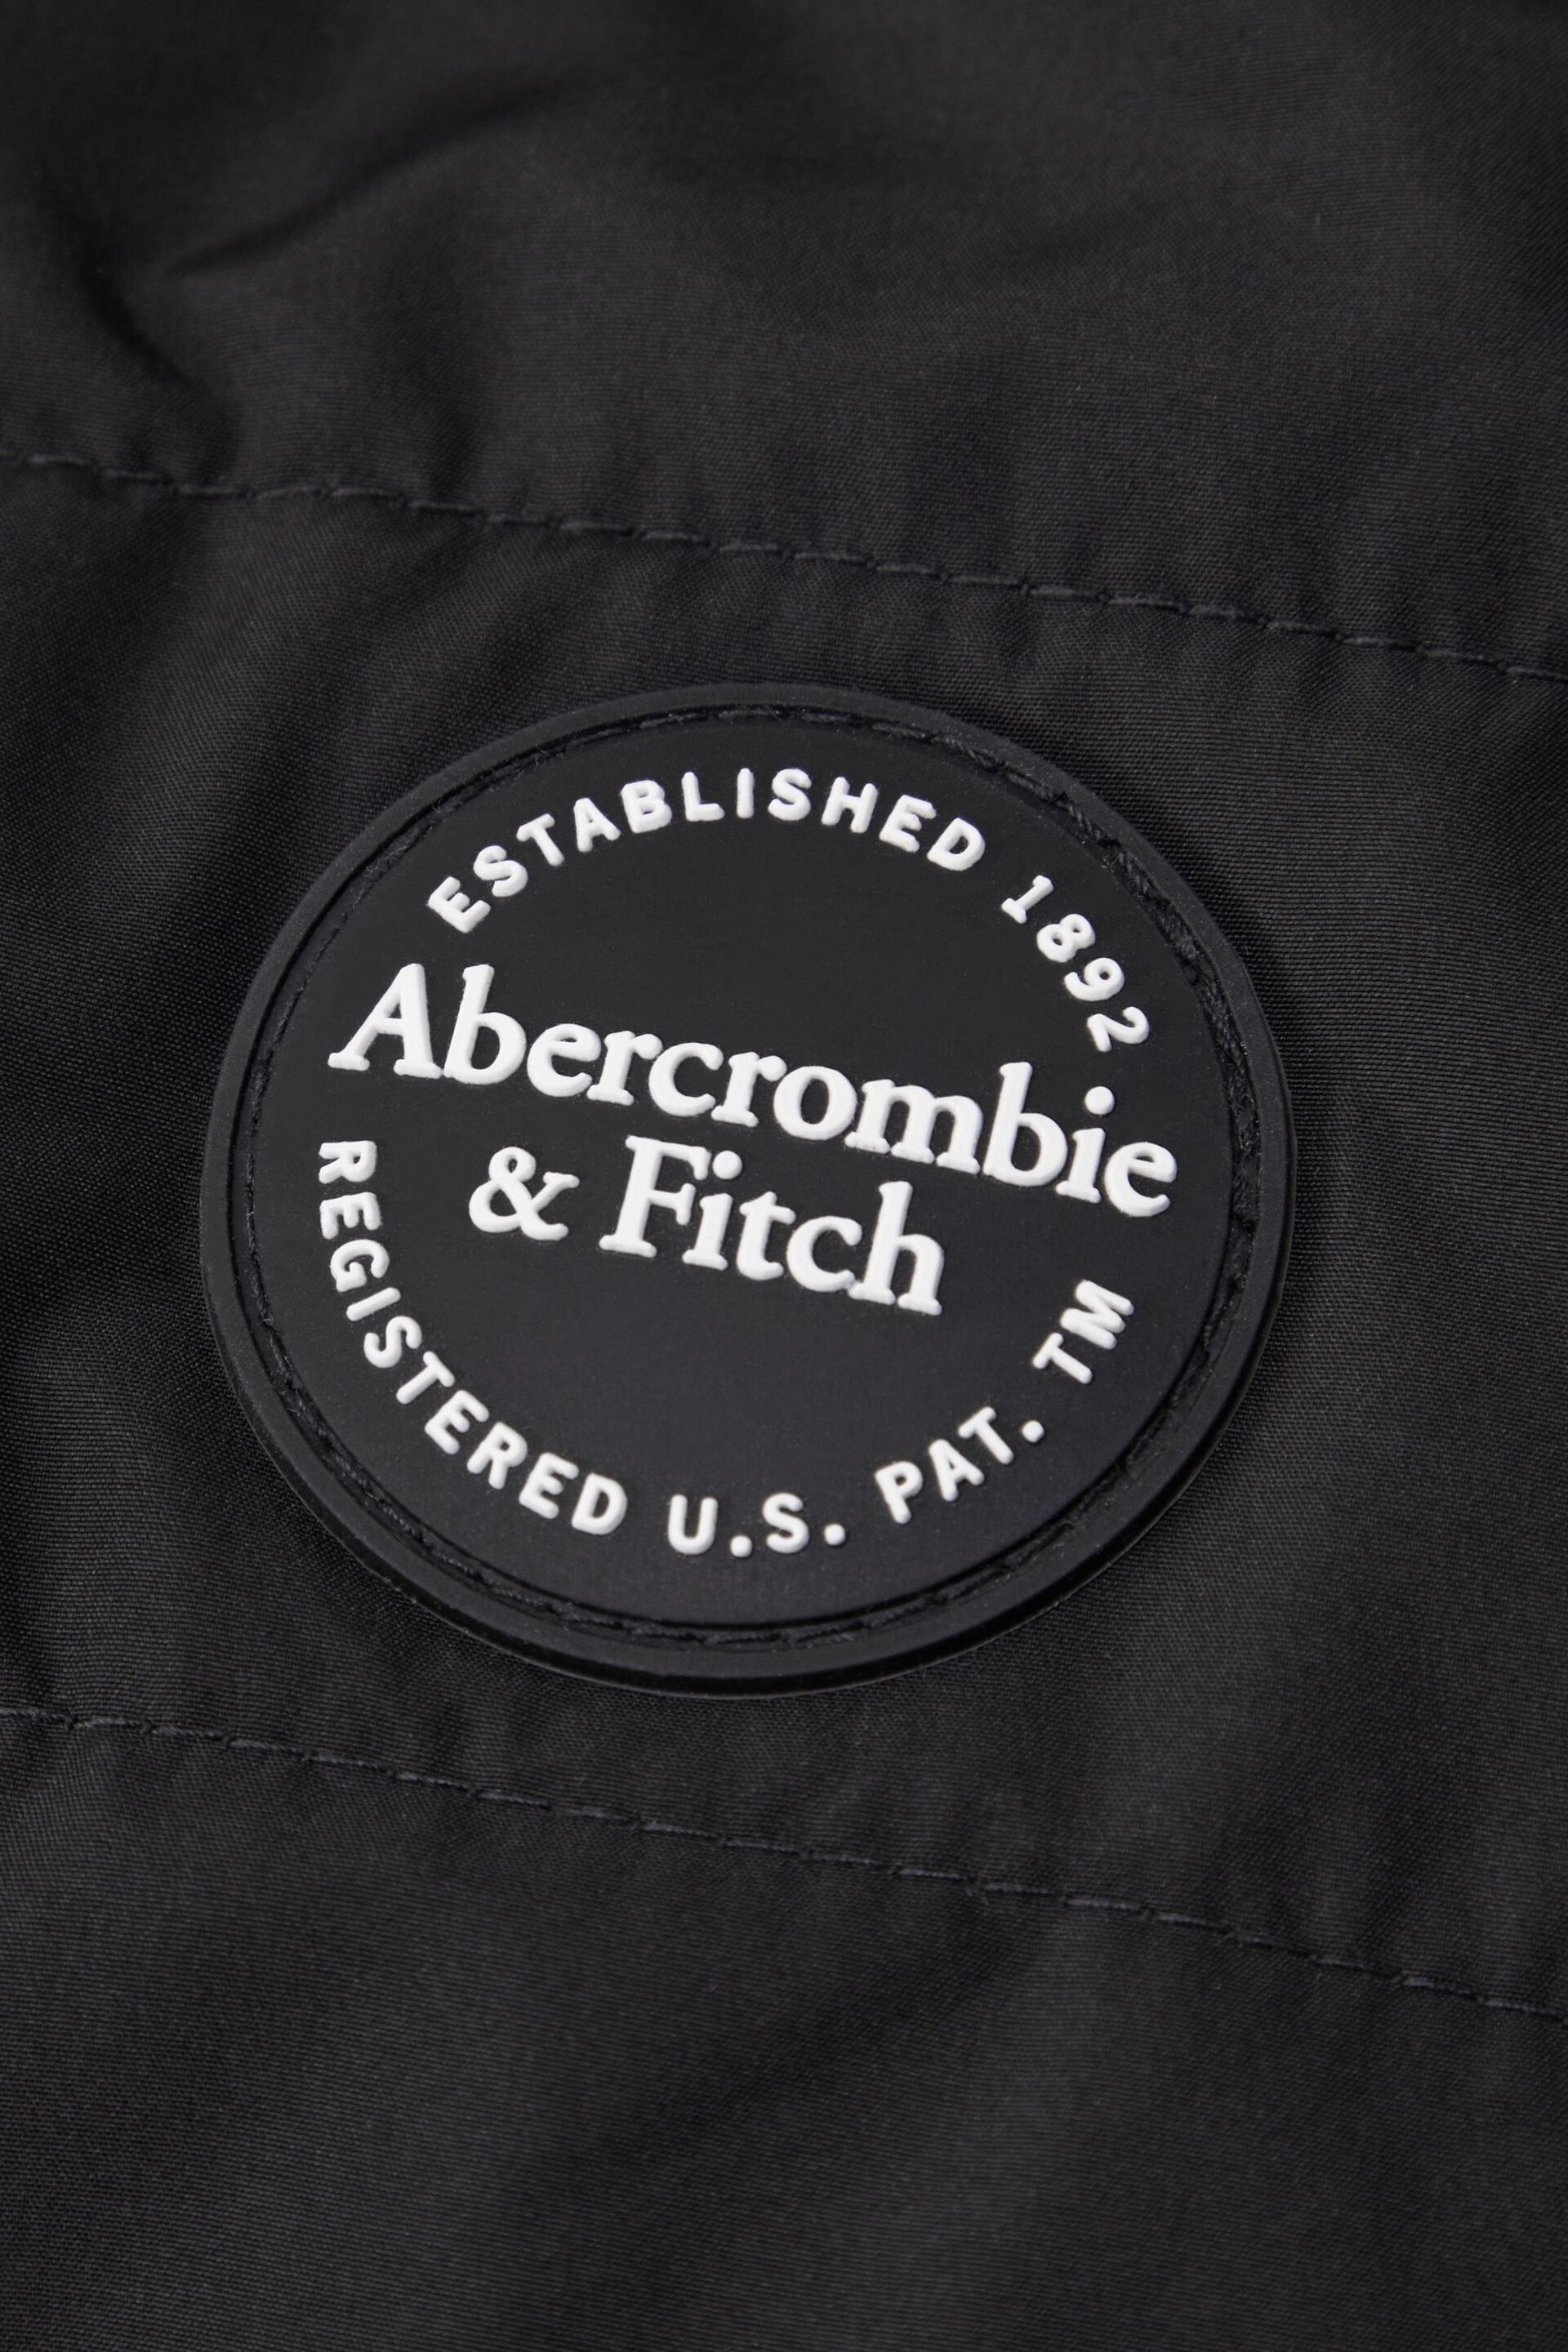 Abercrombie & Fitch Puffer Jacket Black Coat - Image 4 of 6